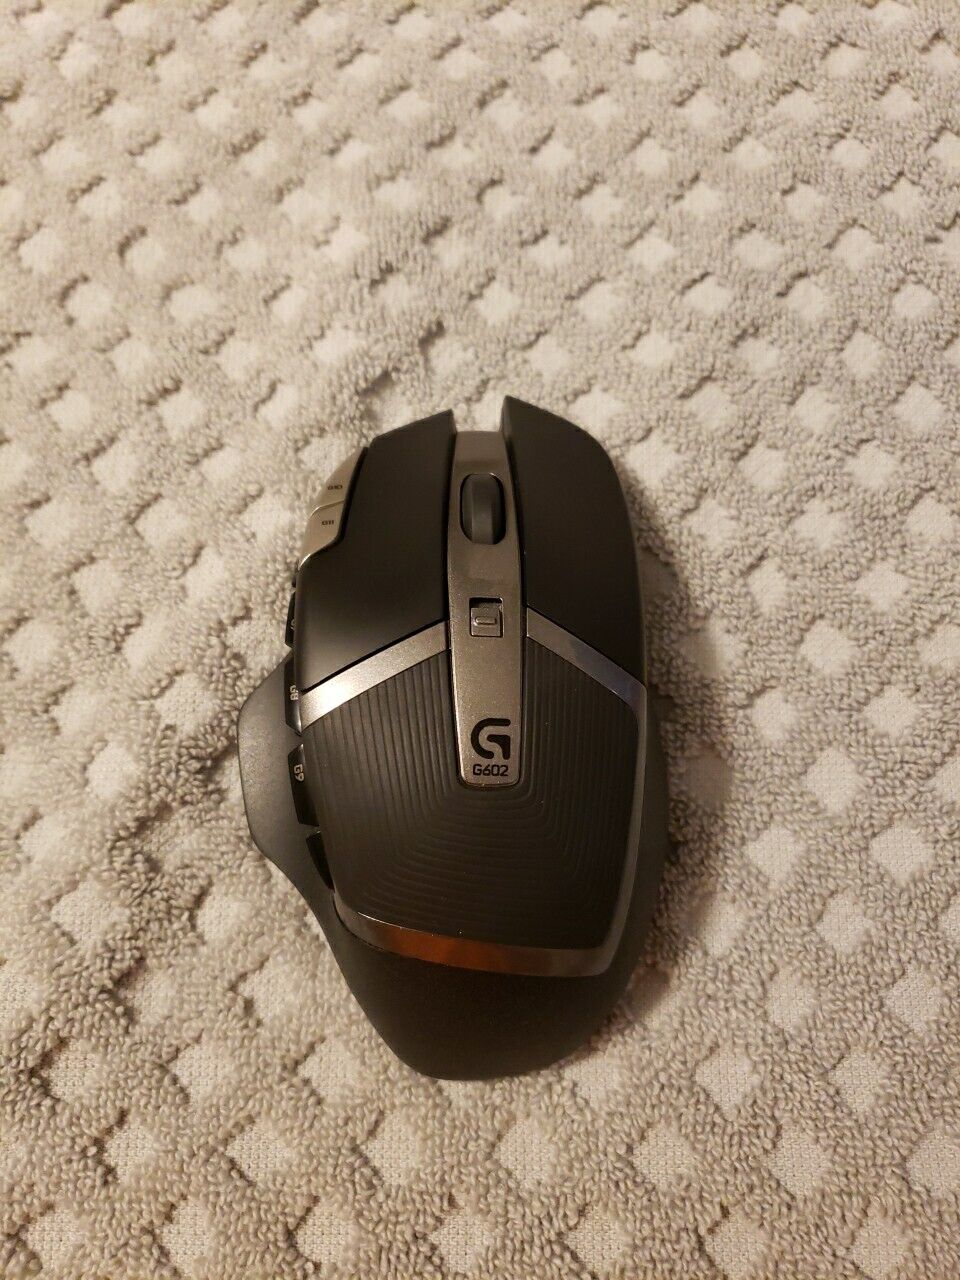 Logitech G602 Gaming Used Wireless Mouse - (500 MHz USB RECEIVER NOT INCLUDED).